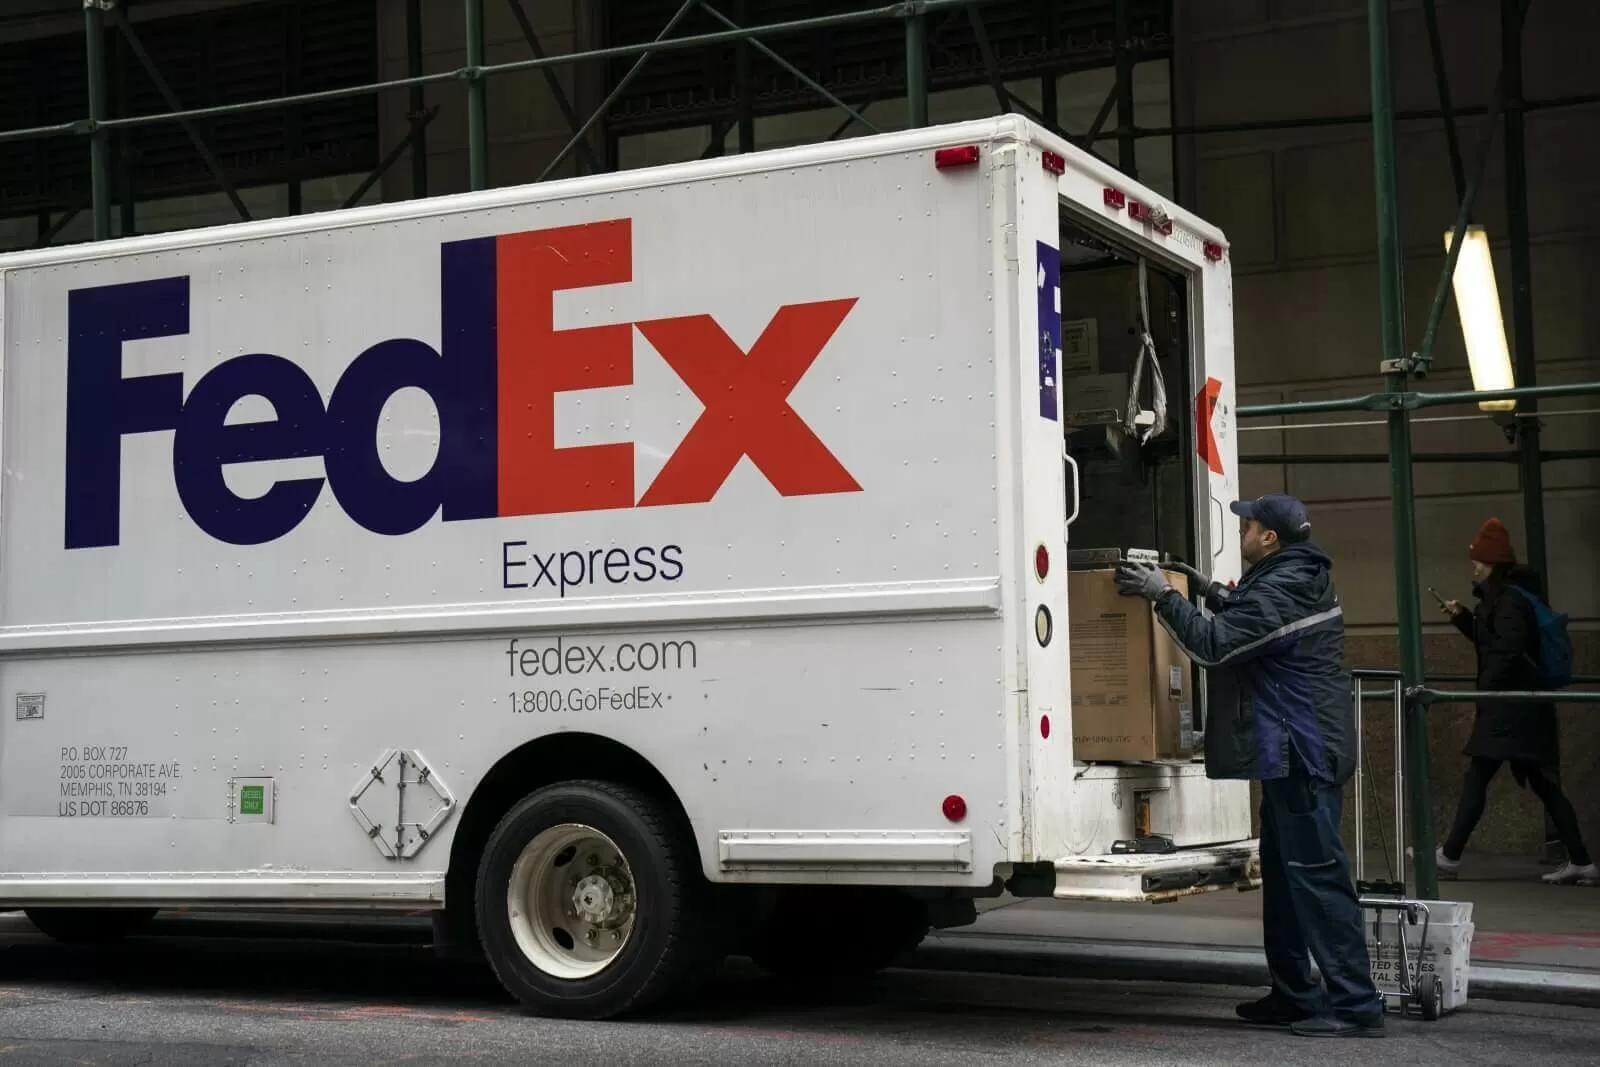 Amazon has lifted its FedEx ban for third-party sellers